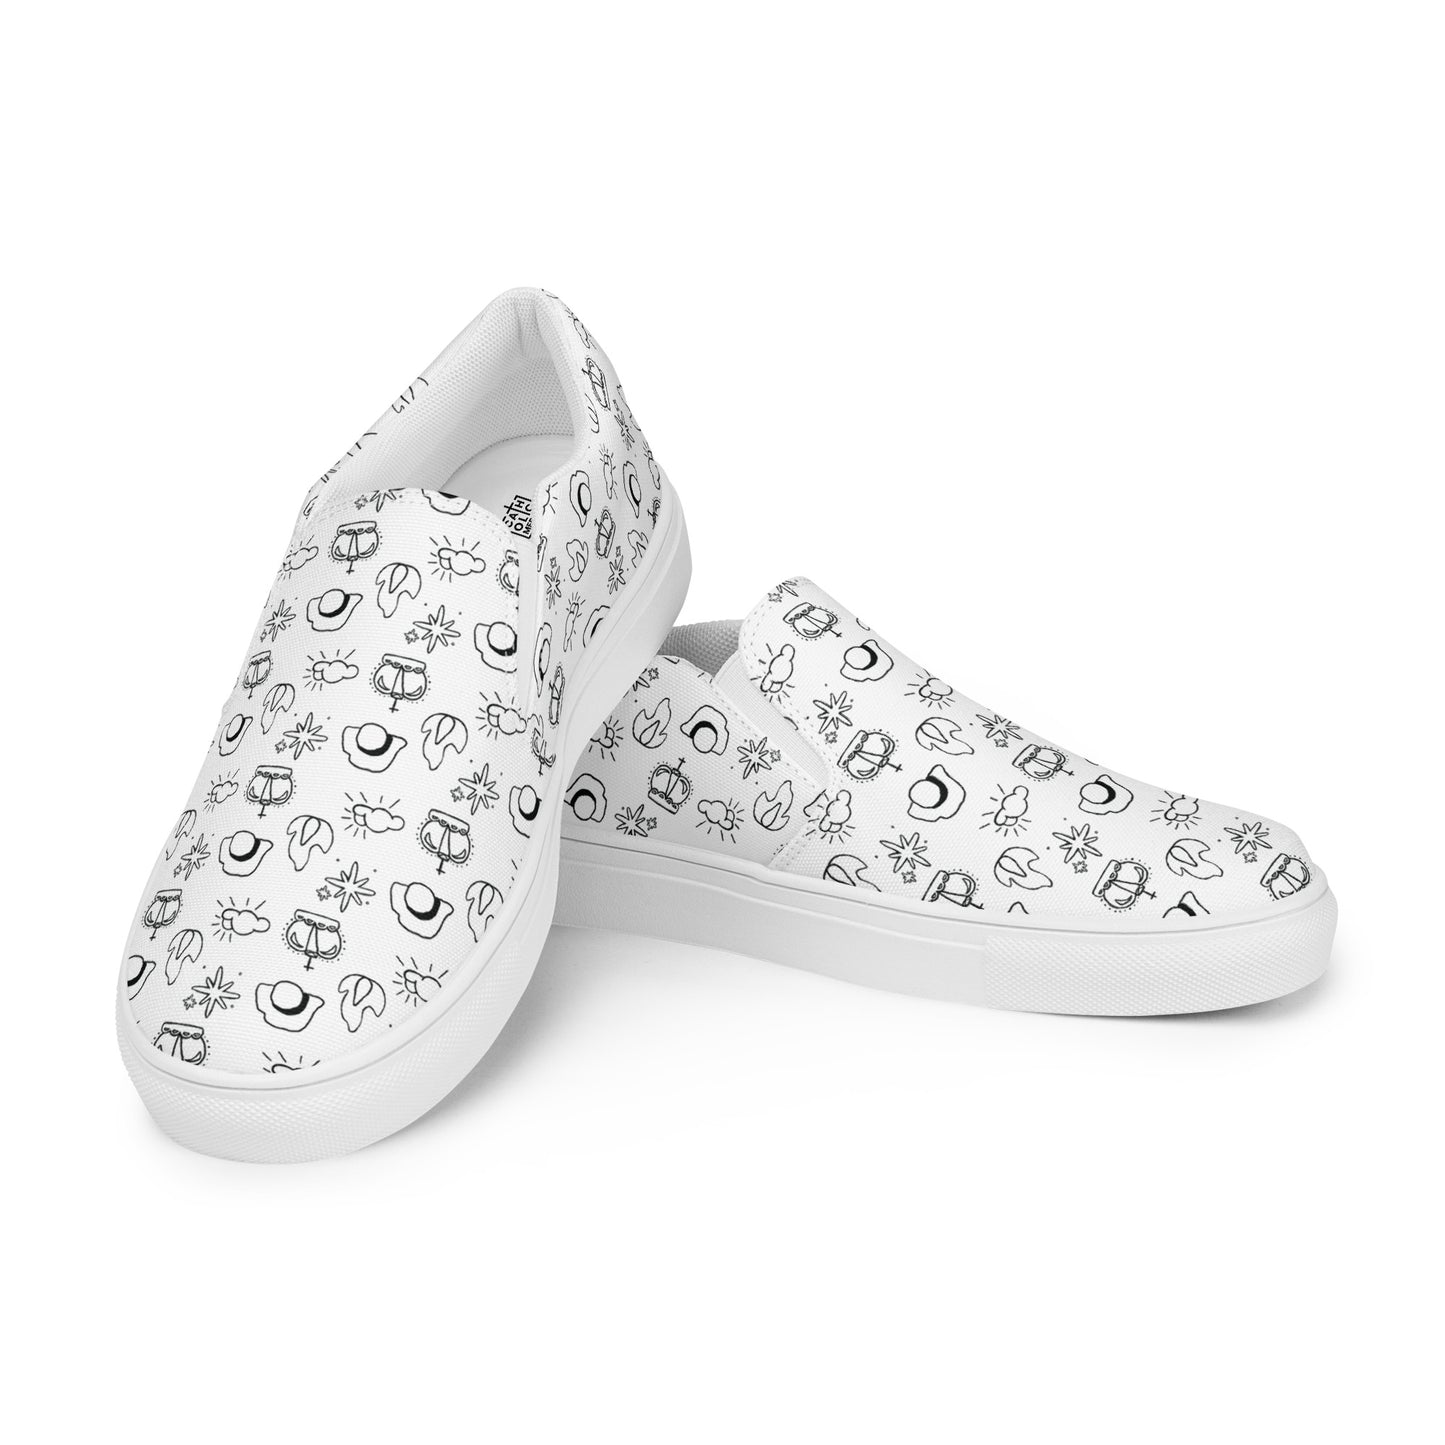 "Walking with the Saints | Glorious Mysteries" – Men’s Slip-On's